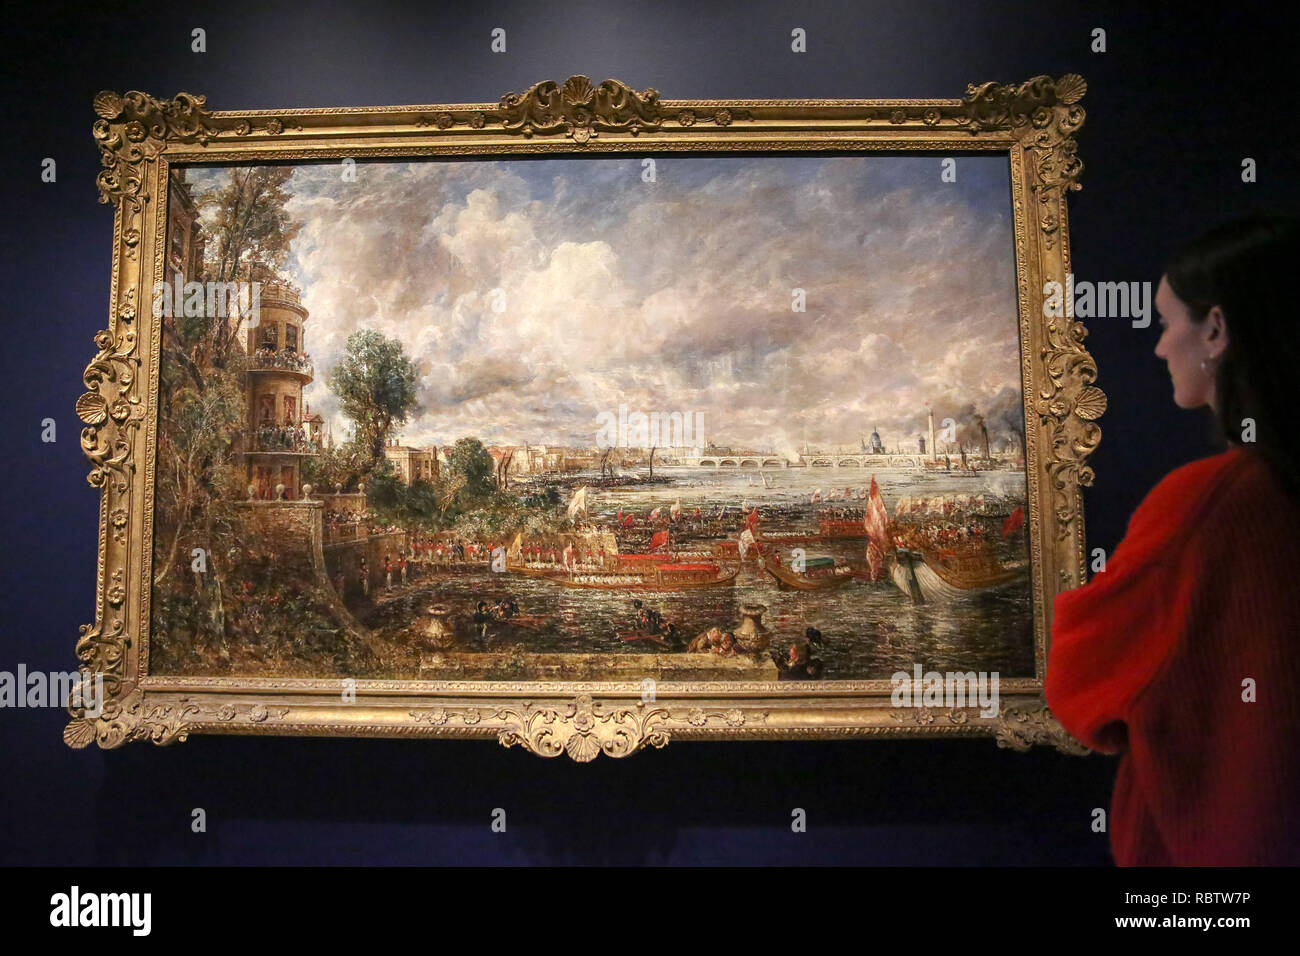 A staff member seen viewing a painting by John Constable. The Royal Academy Schools’ most illustrious graduates, exhibits Helvoetsluys (Helvoetsluys; - the City of Utrecht, 64, going to sea) 1832 by J.M.W. Turner (1775-1851) and The opening of Waterloo Bridge (ÒWaterloo Bridge, from the Whitehall Stairs, 18th June 1817) by John Constable (1776-1837), in, are-telling of one of the most legendary events in the history of the Summer Exhibition, it toke place at the Royal Academy of Arts. The two paintings were reunited for the first time since the artists clashed at the Summer Exhibition in 1832. Stock Photo